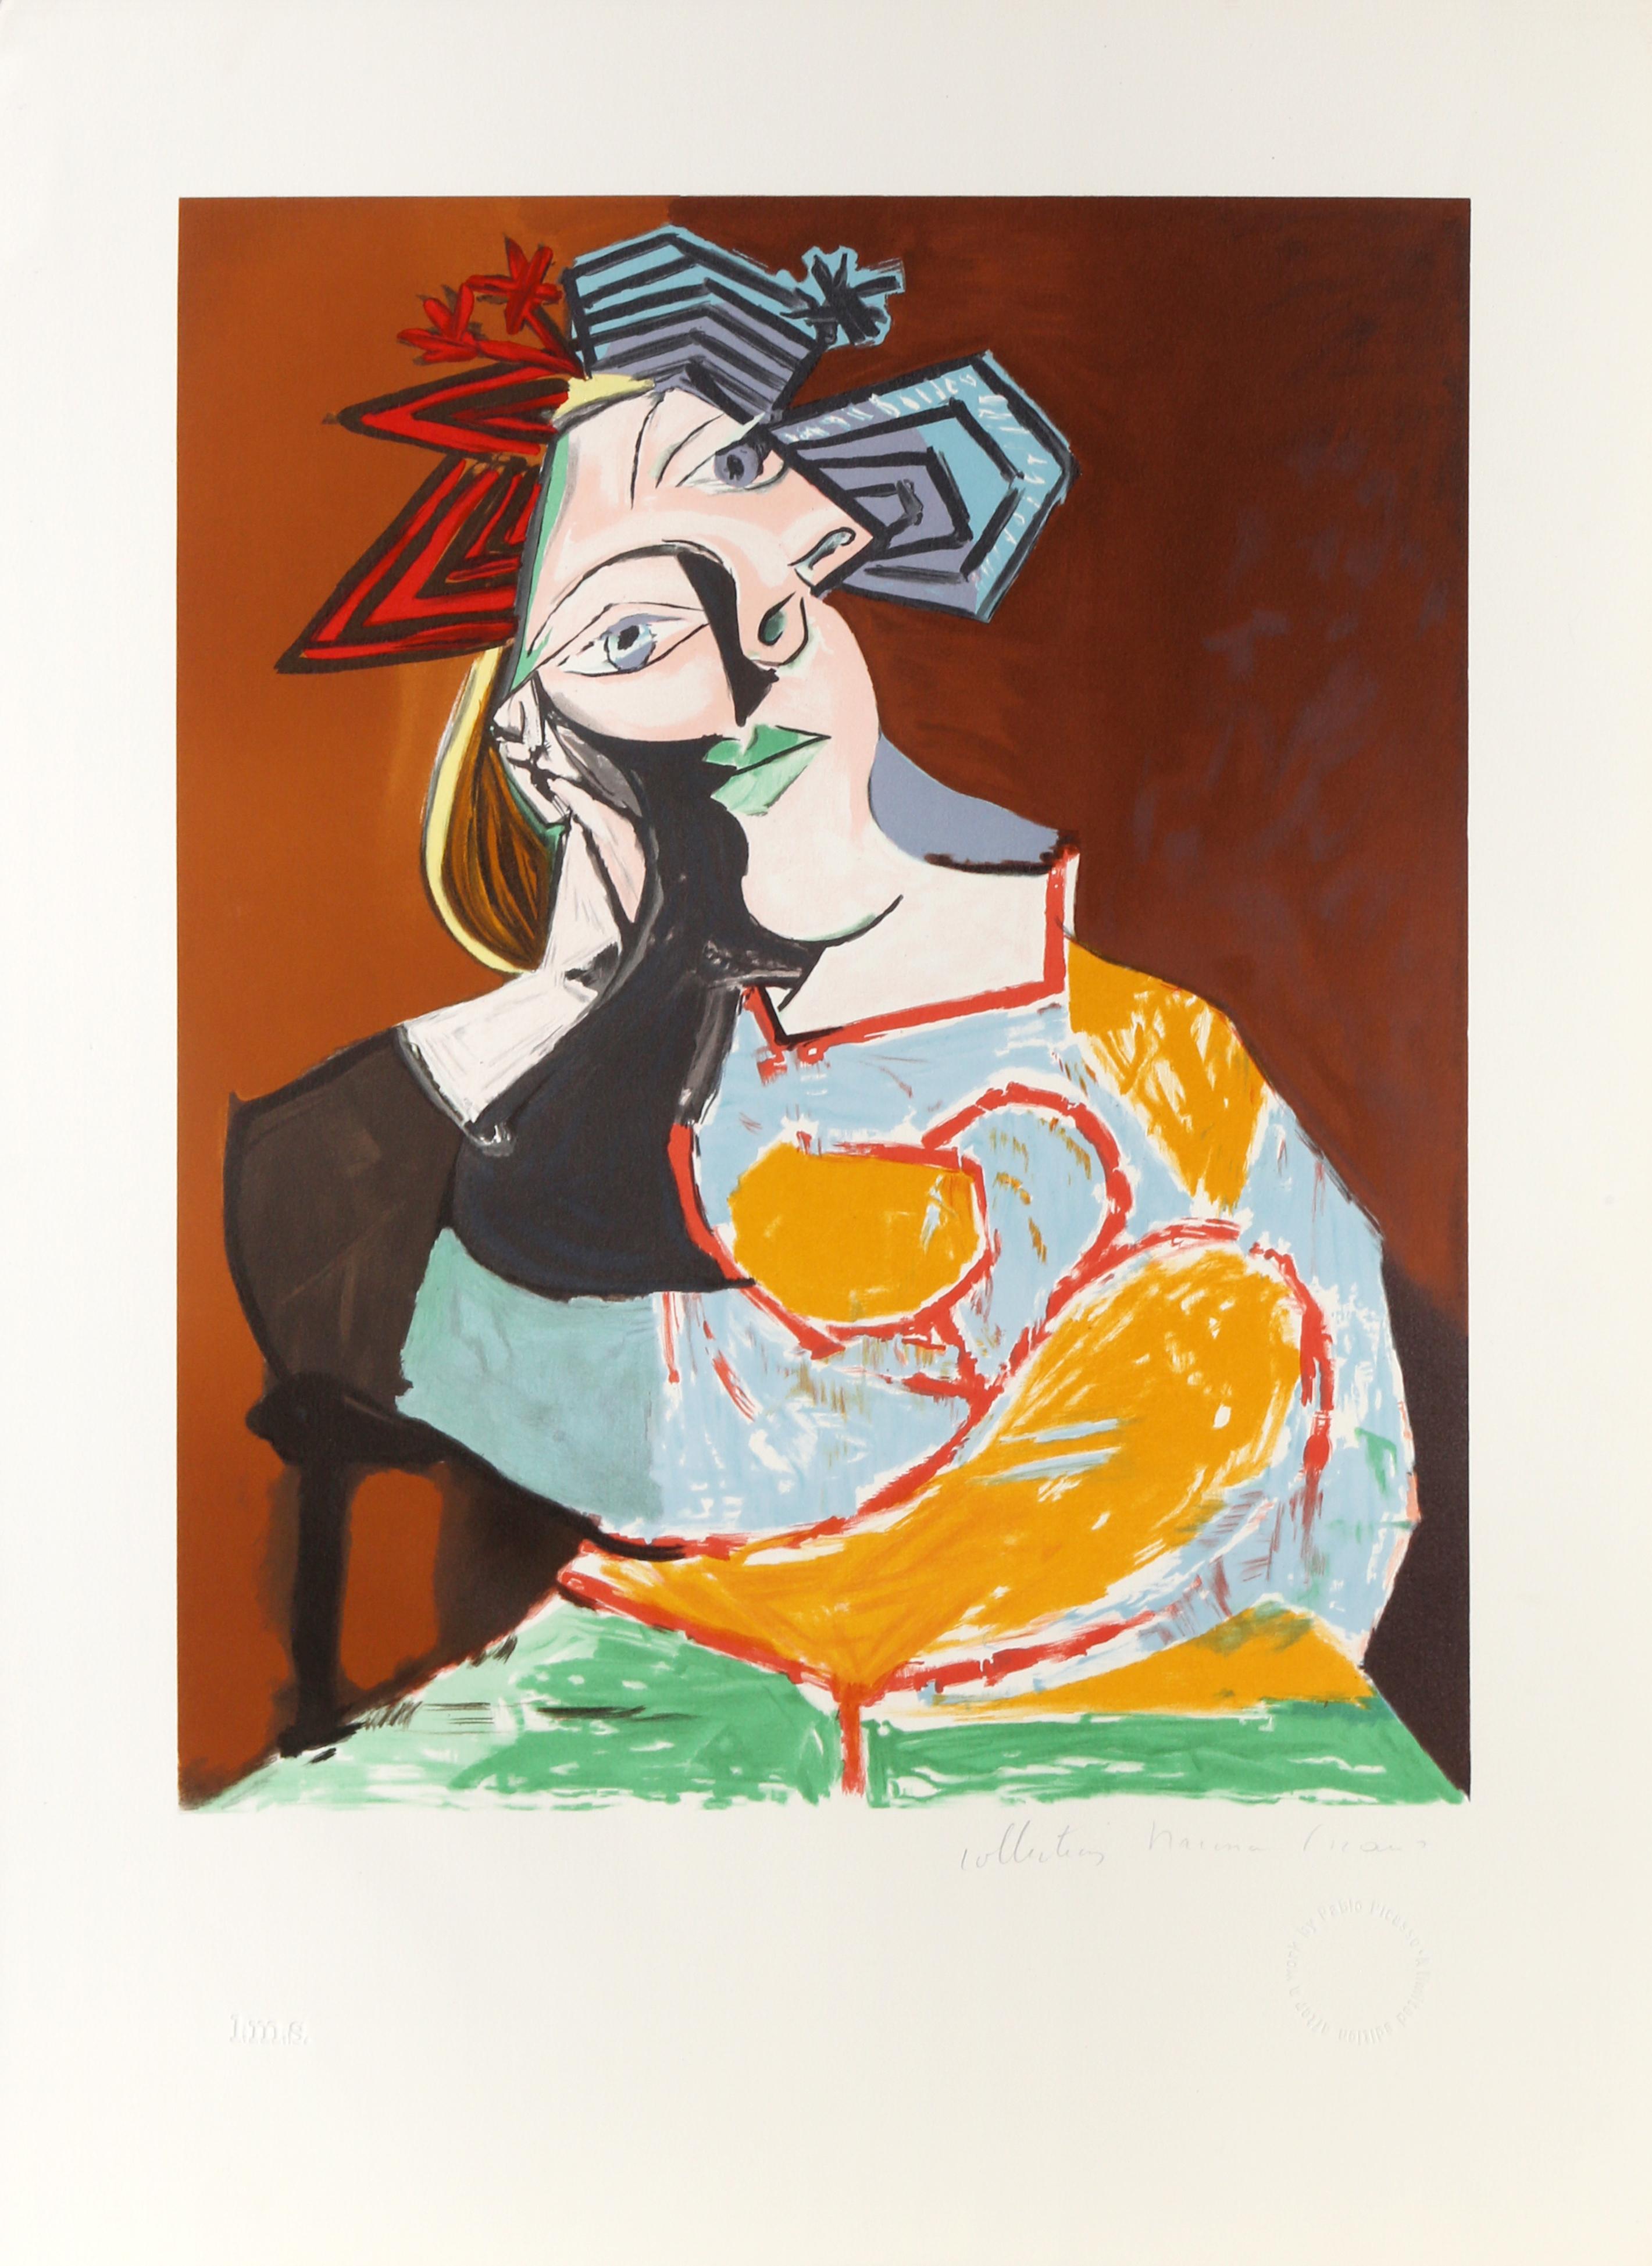 Leaning against a blue and red flag, the woman in this print by Pablo Picasso stares back at the viewer with her large blue eyes. Wearing a patterned outfit, she is portrayed through several curving and rectangular geometric shapes emblematic of the